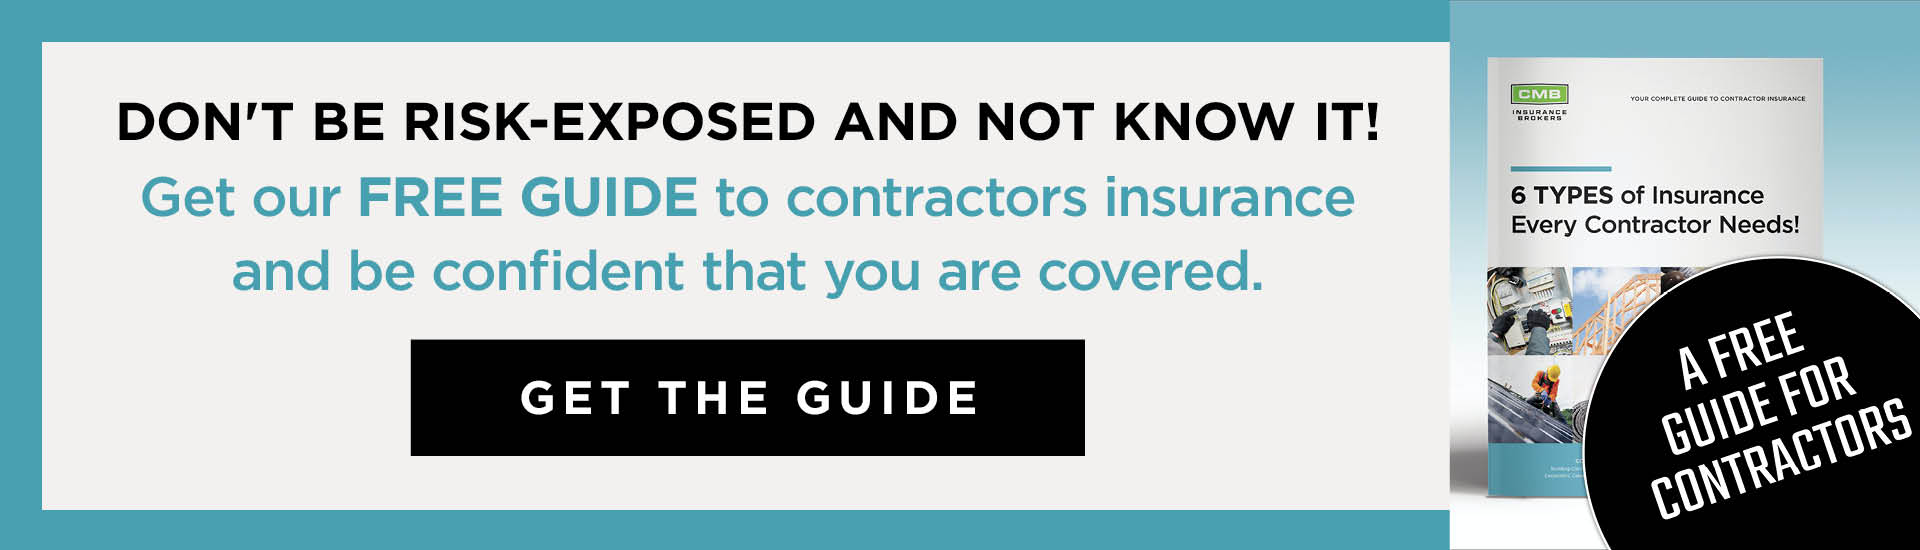 Free guide to contractors insurance.